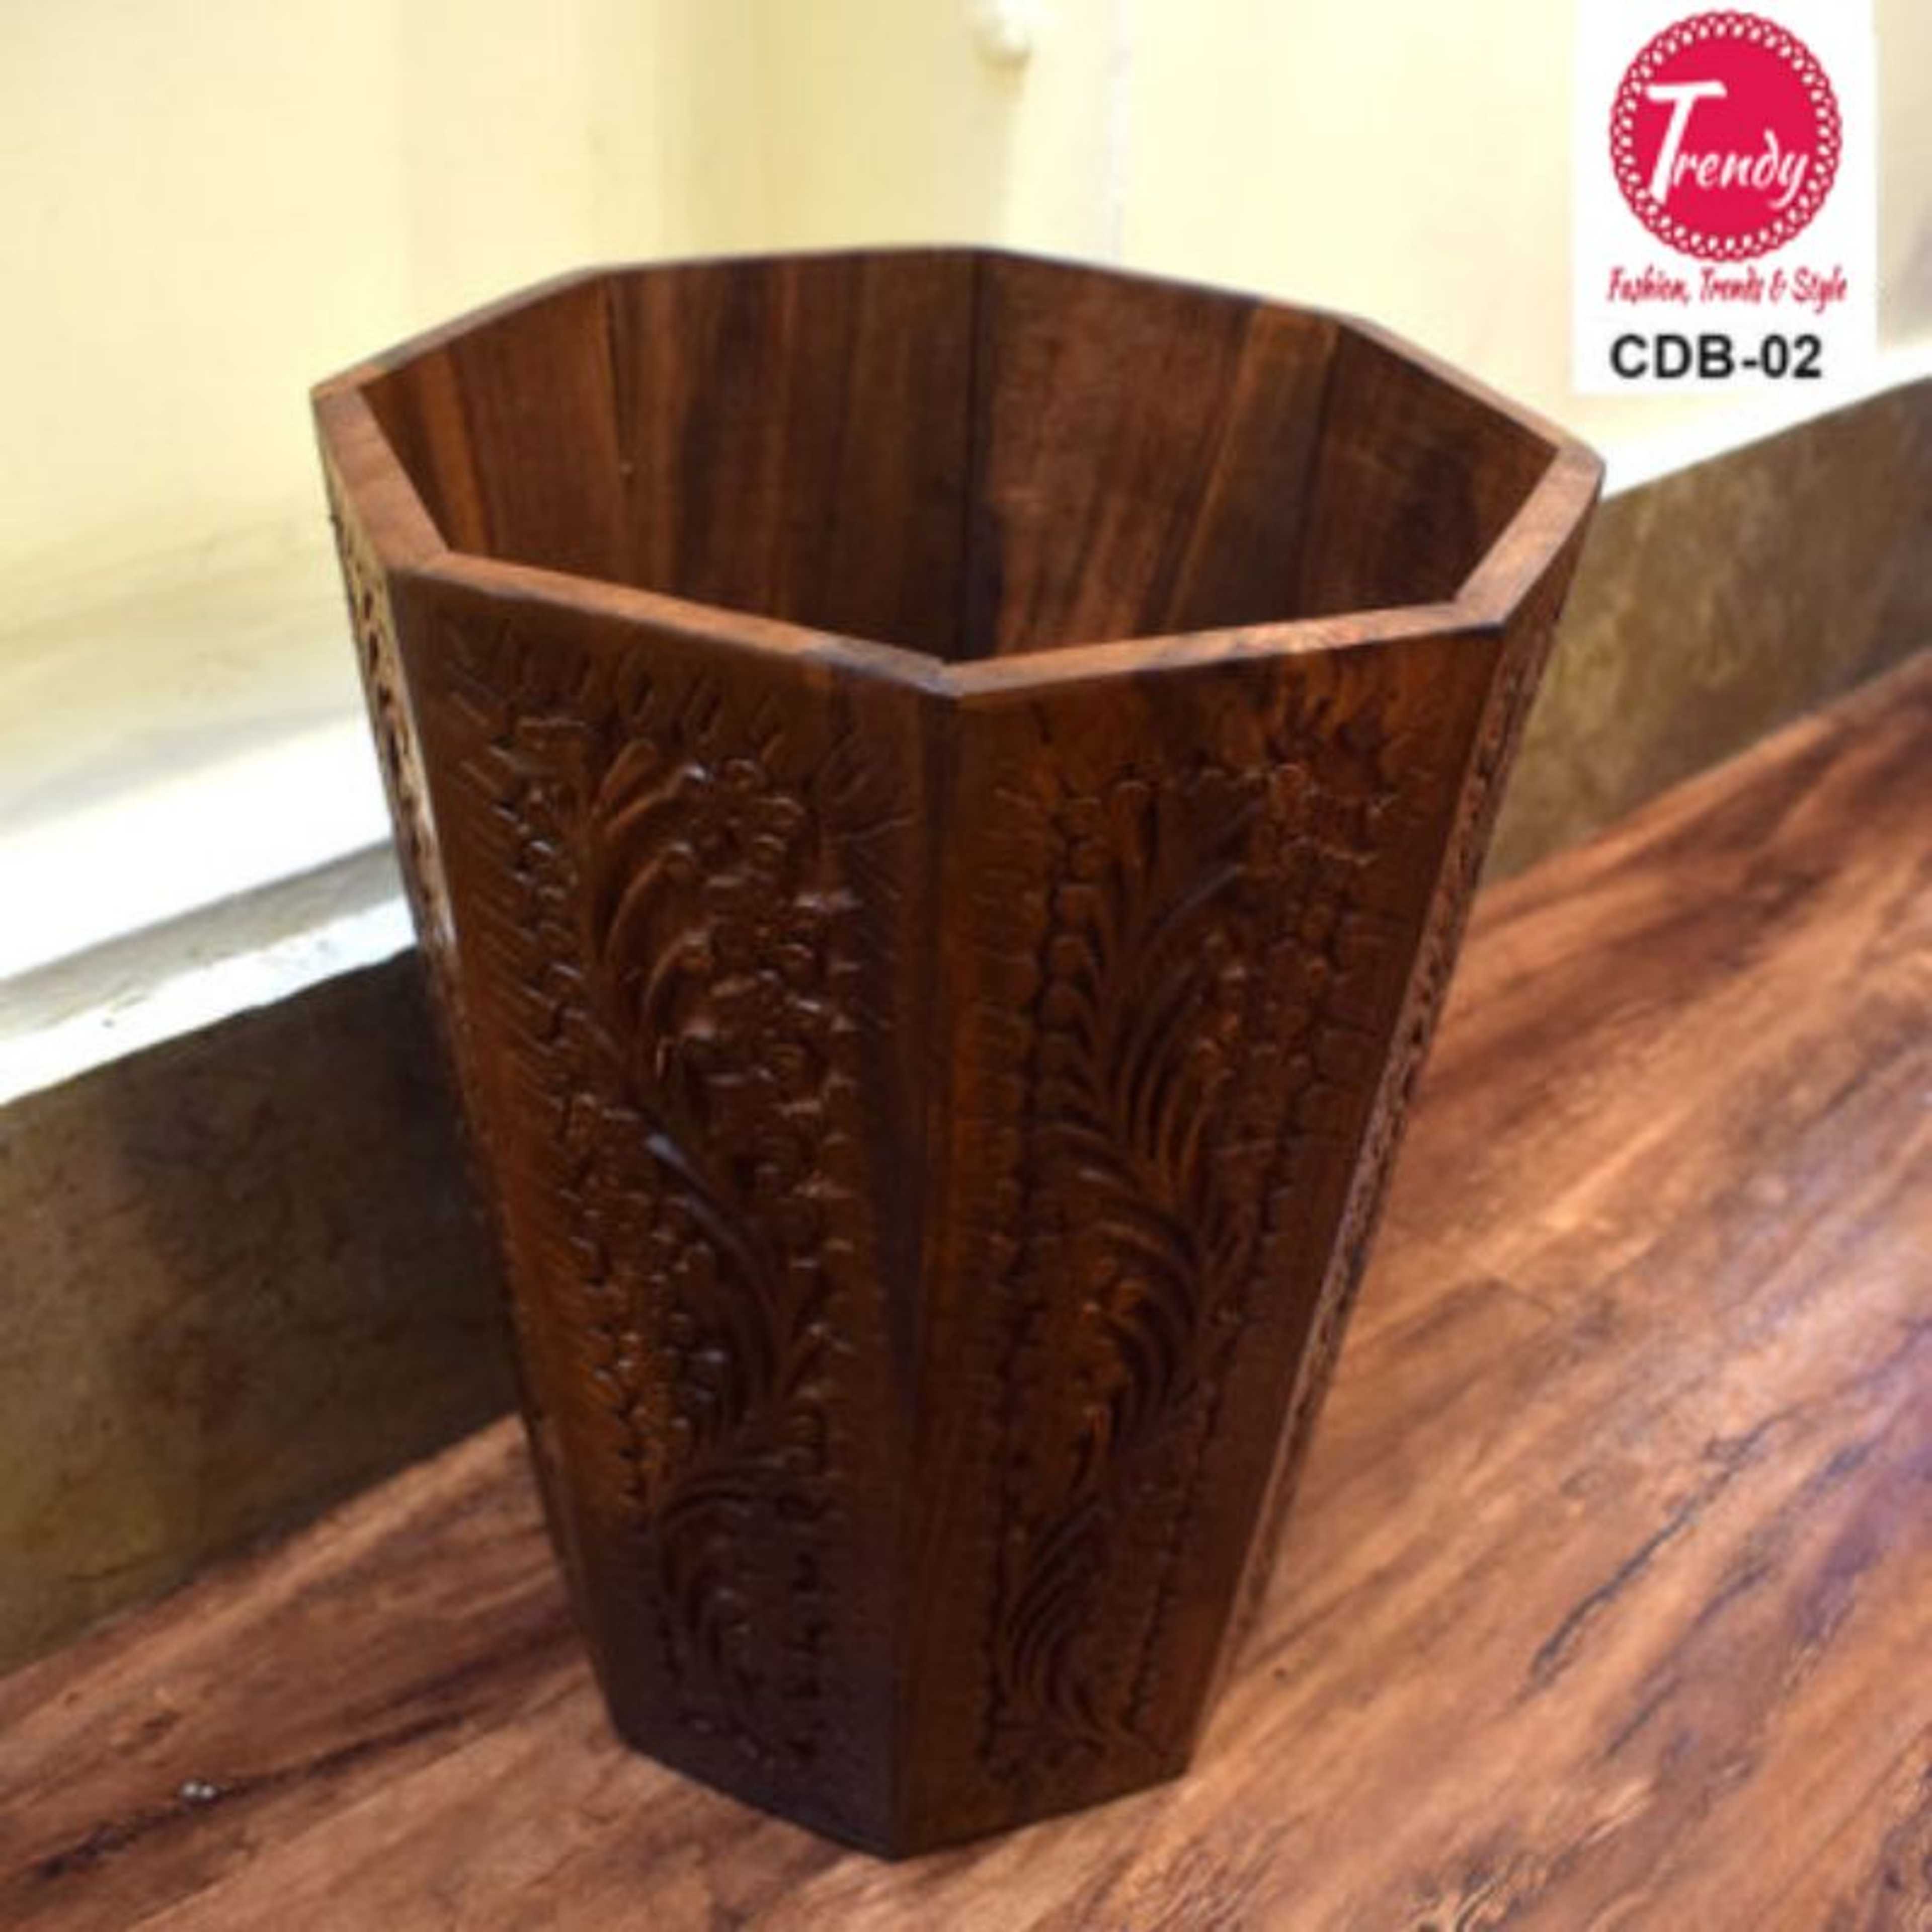 Wooden Dustbin With Man Crafted Carving Work CDB-02